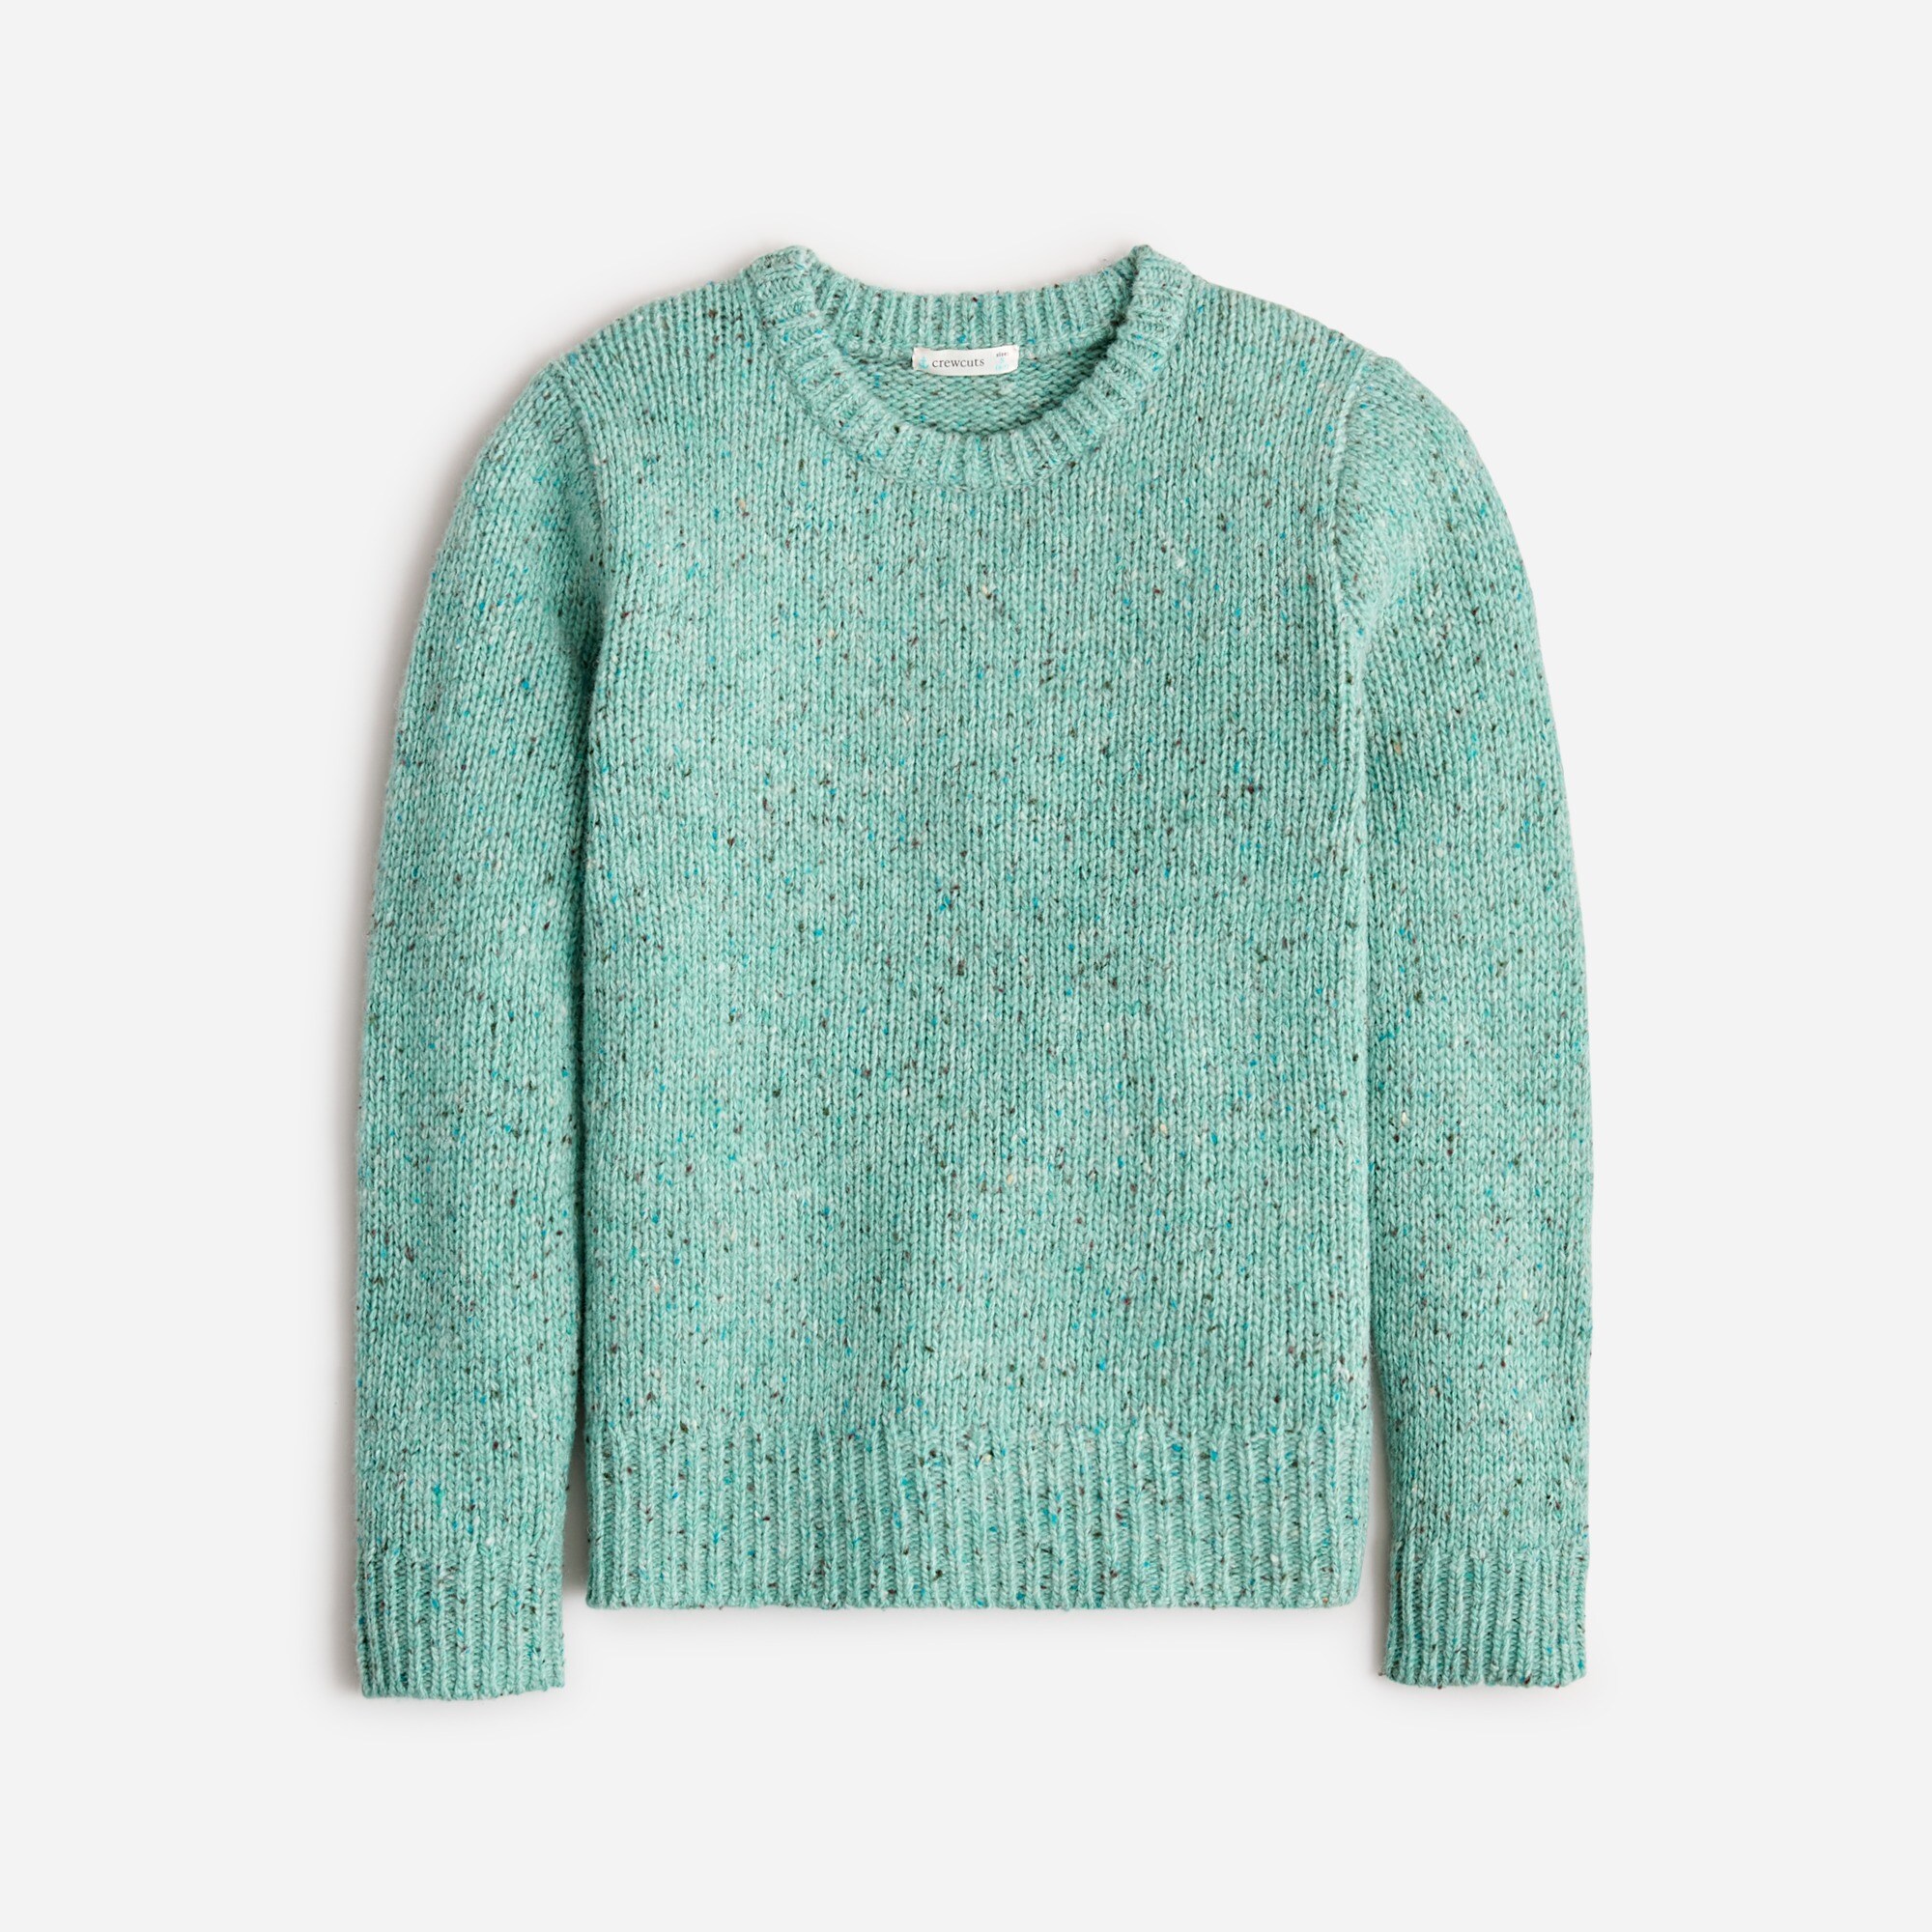  Kids' crewneck sweater in donegal-inspired wool blend